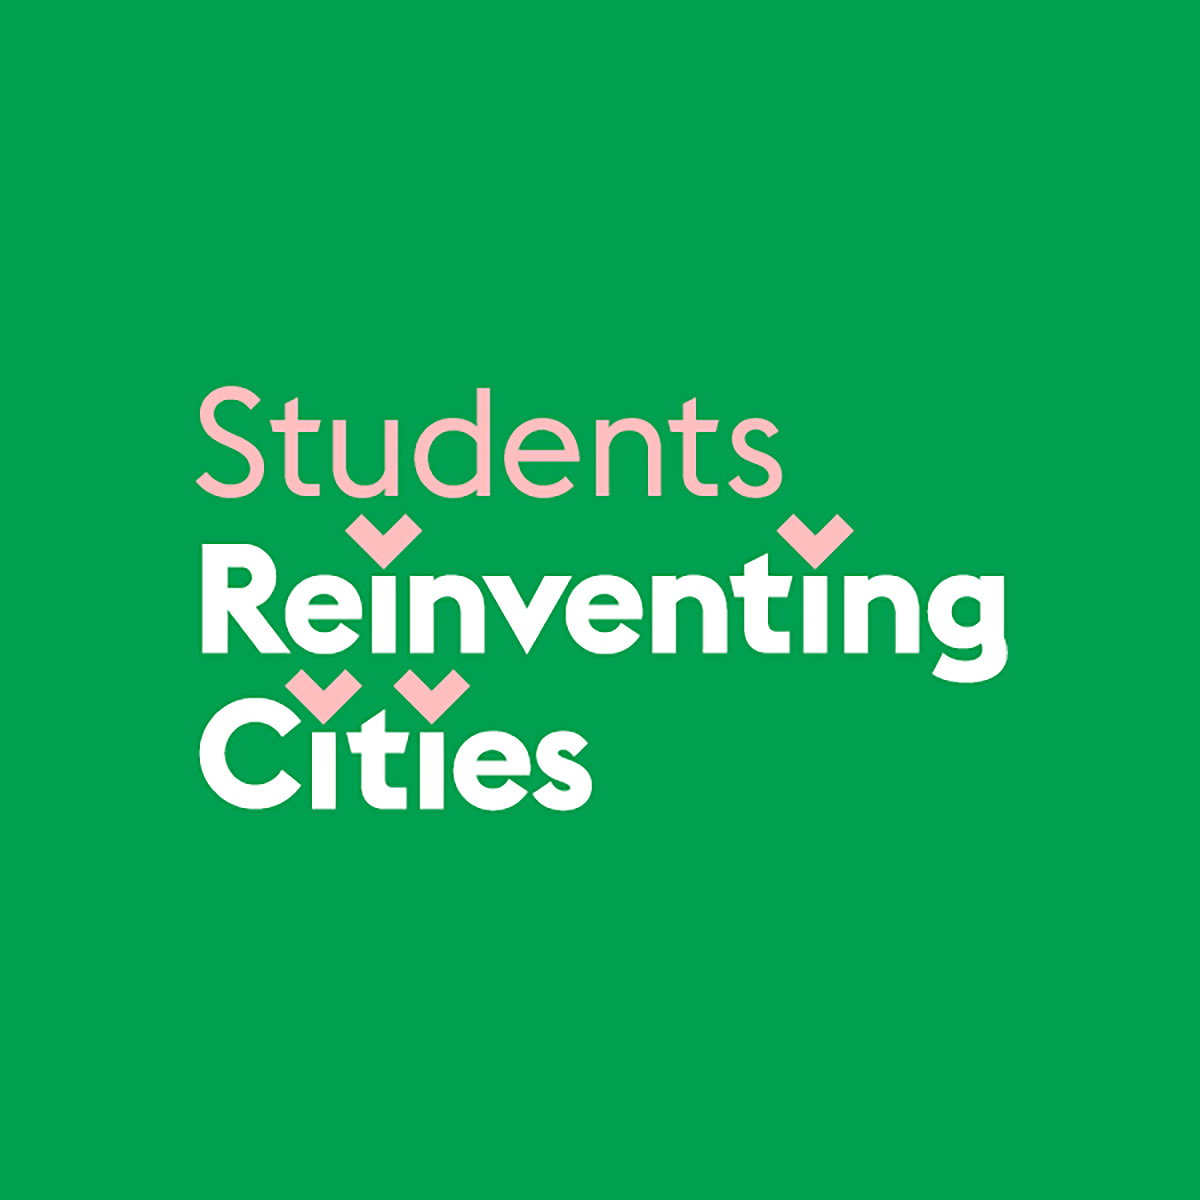 Students reinventing cities